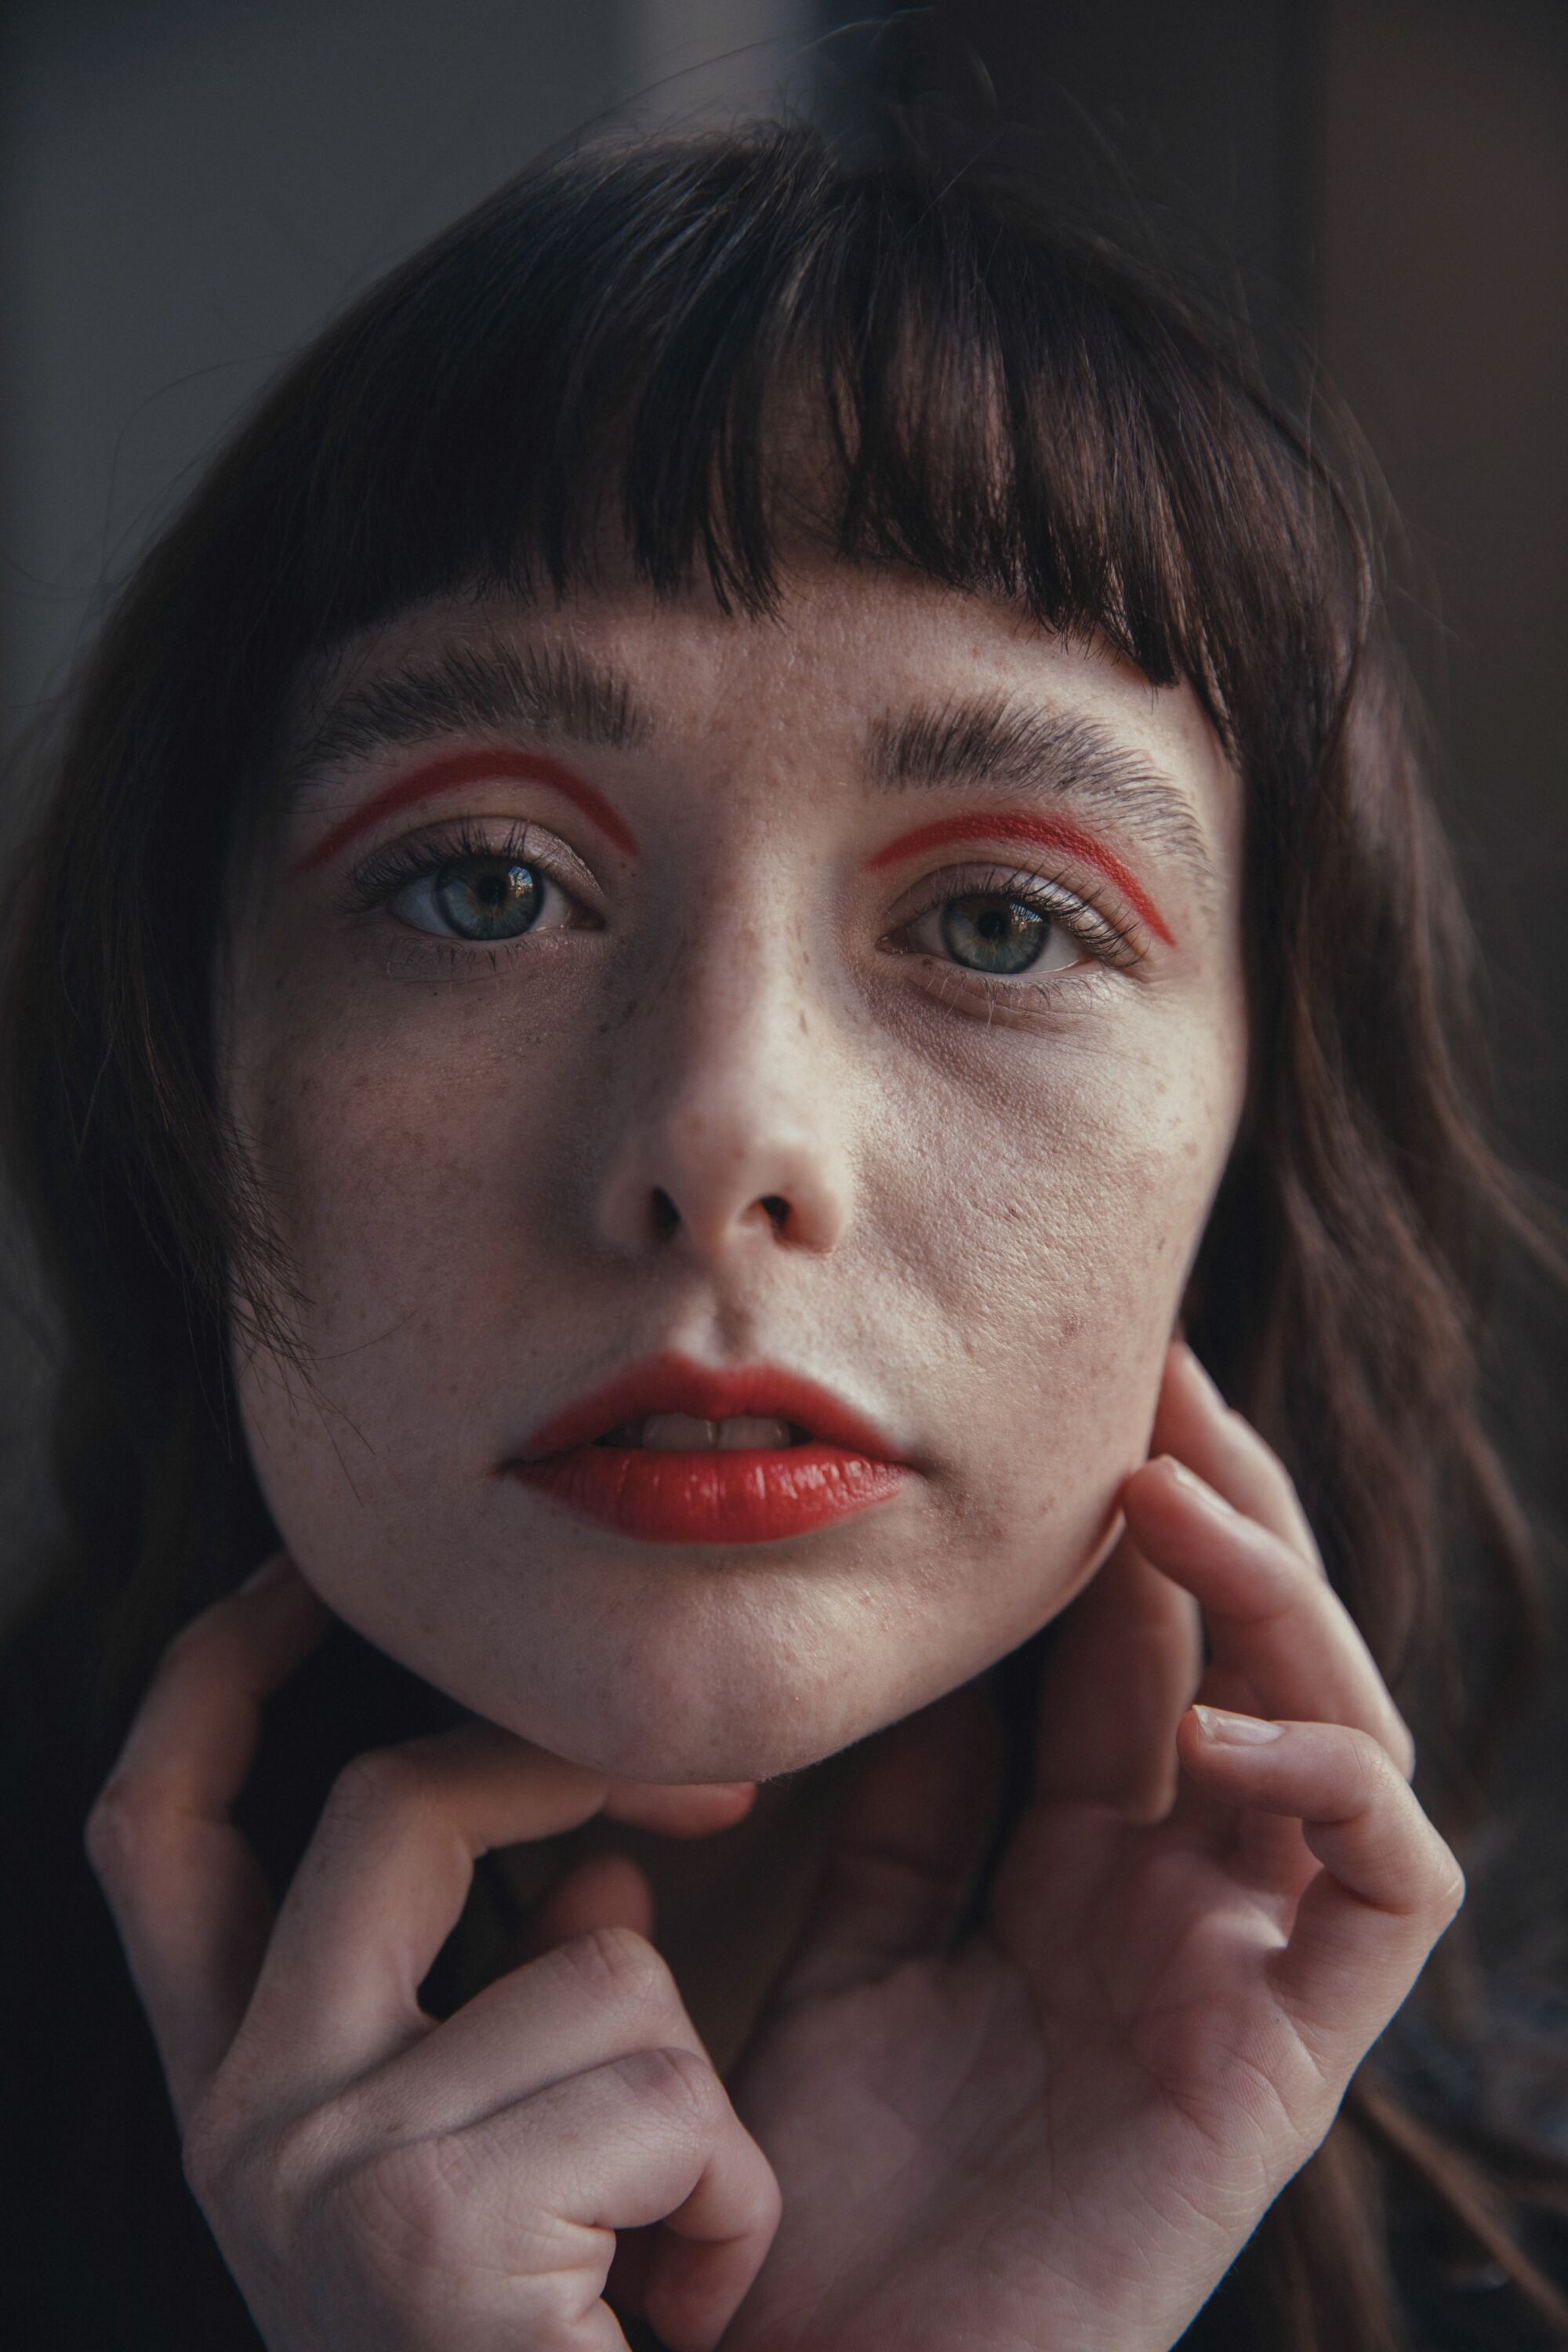 A woman with red lipstick and red eye makeup holds her hands to her face.